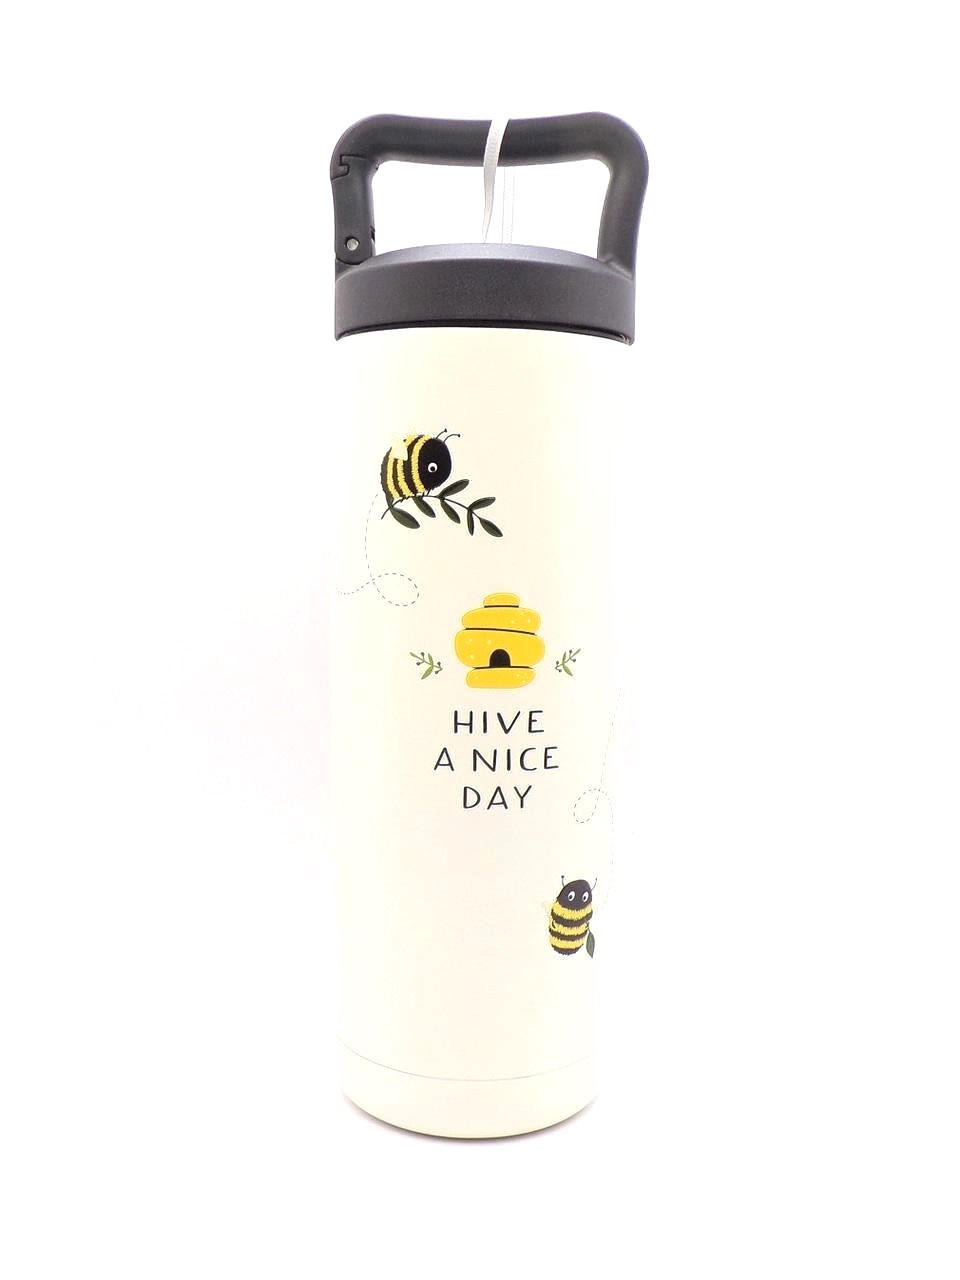 https://cdn11.bigcommerce.com/s-1nr8hwfbkq/images/stencil/1280x1280/products/2875/16439/studio-oh-buzzy-bees-water-bottle__20446.1688247253.jpg?c=2